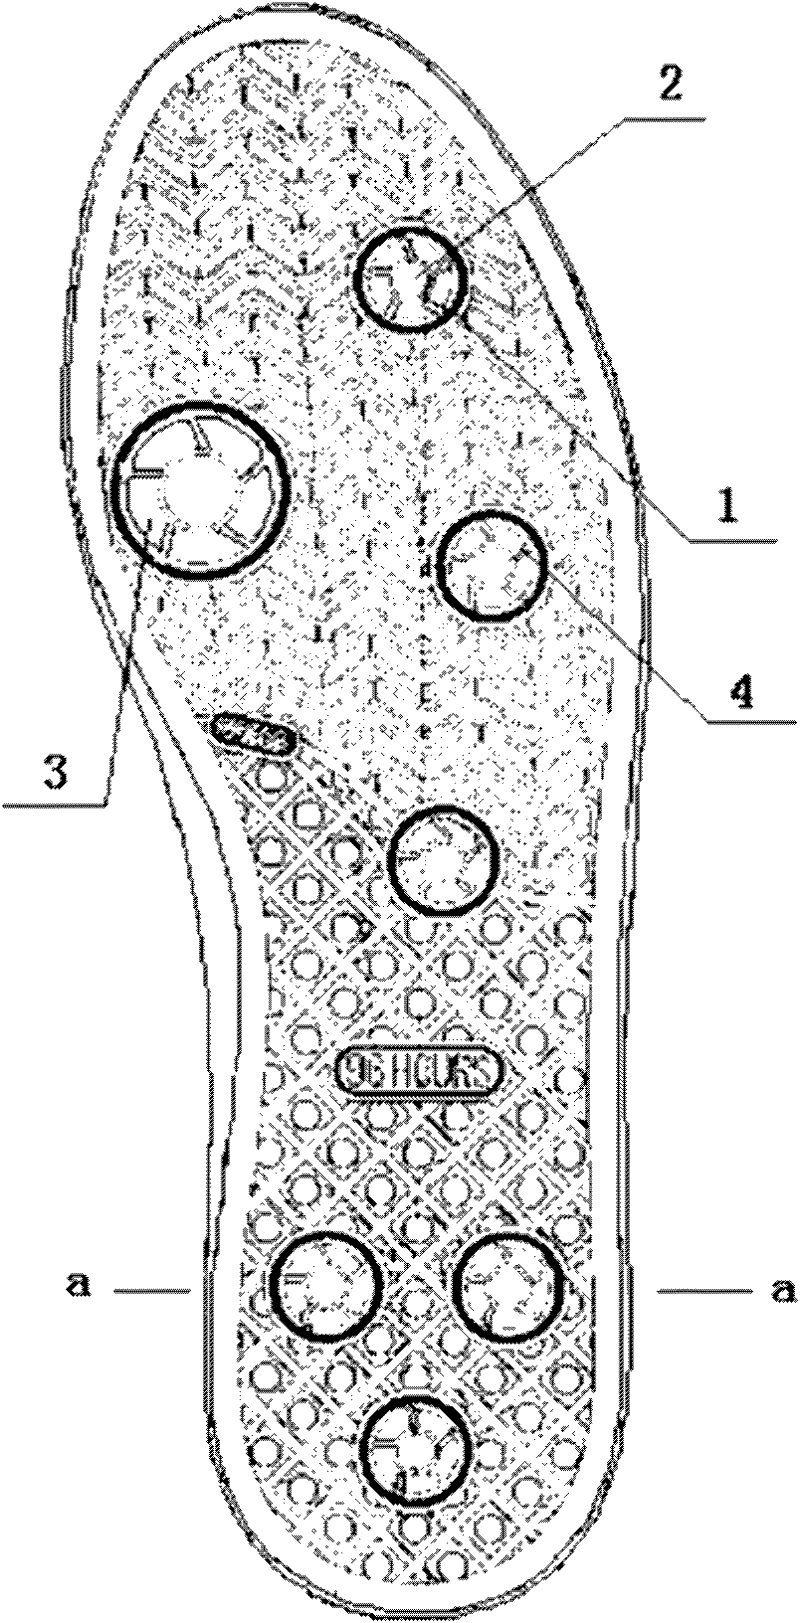 Sole with drainage fan blades